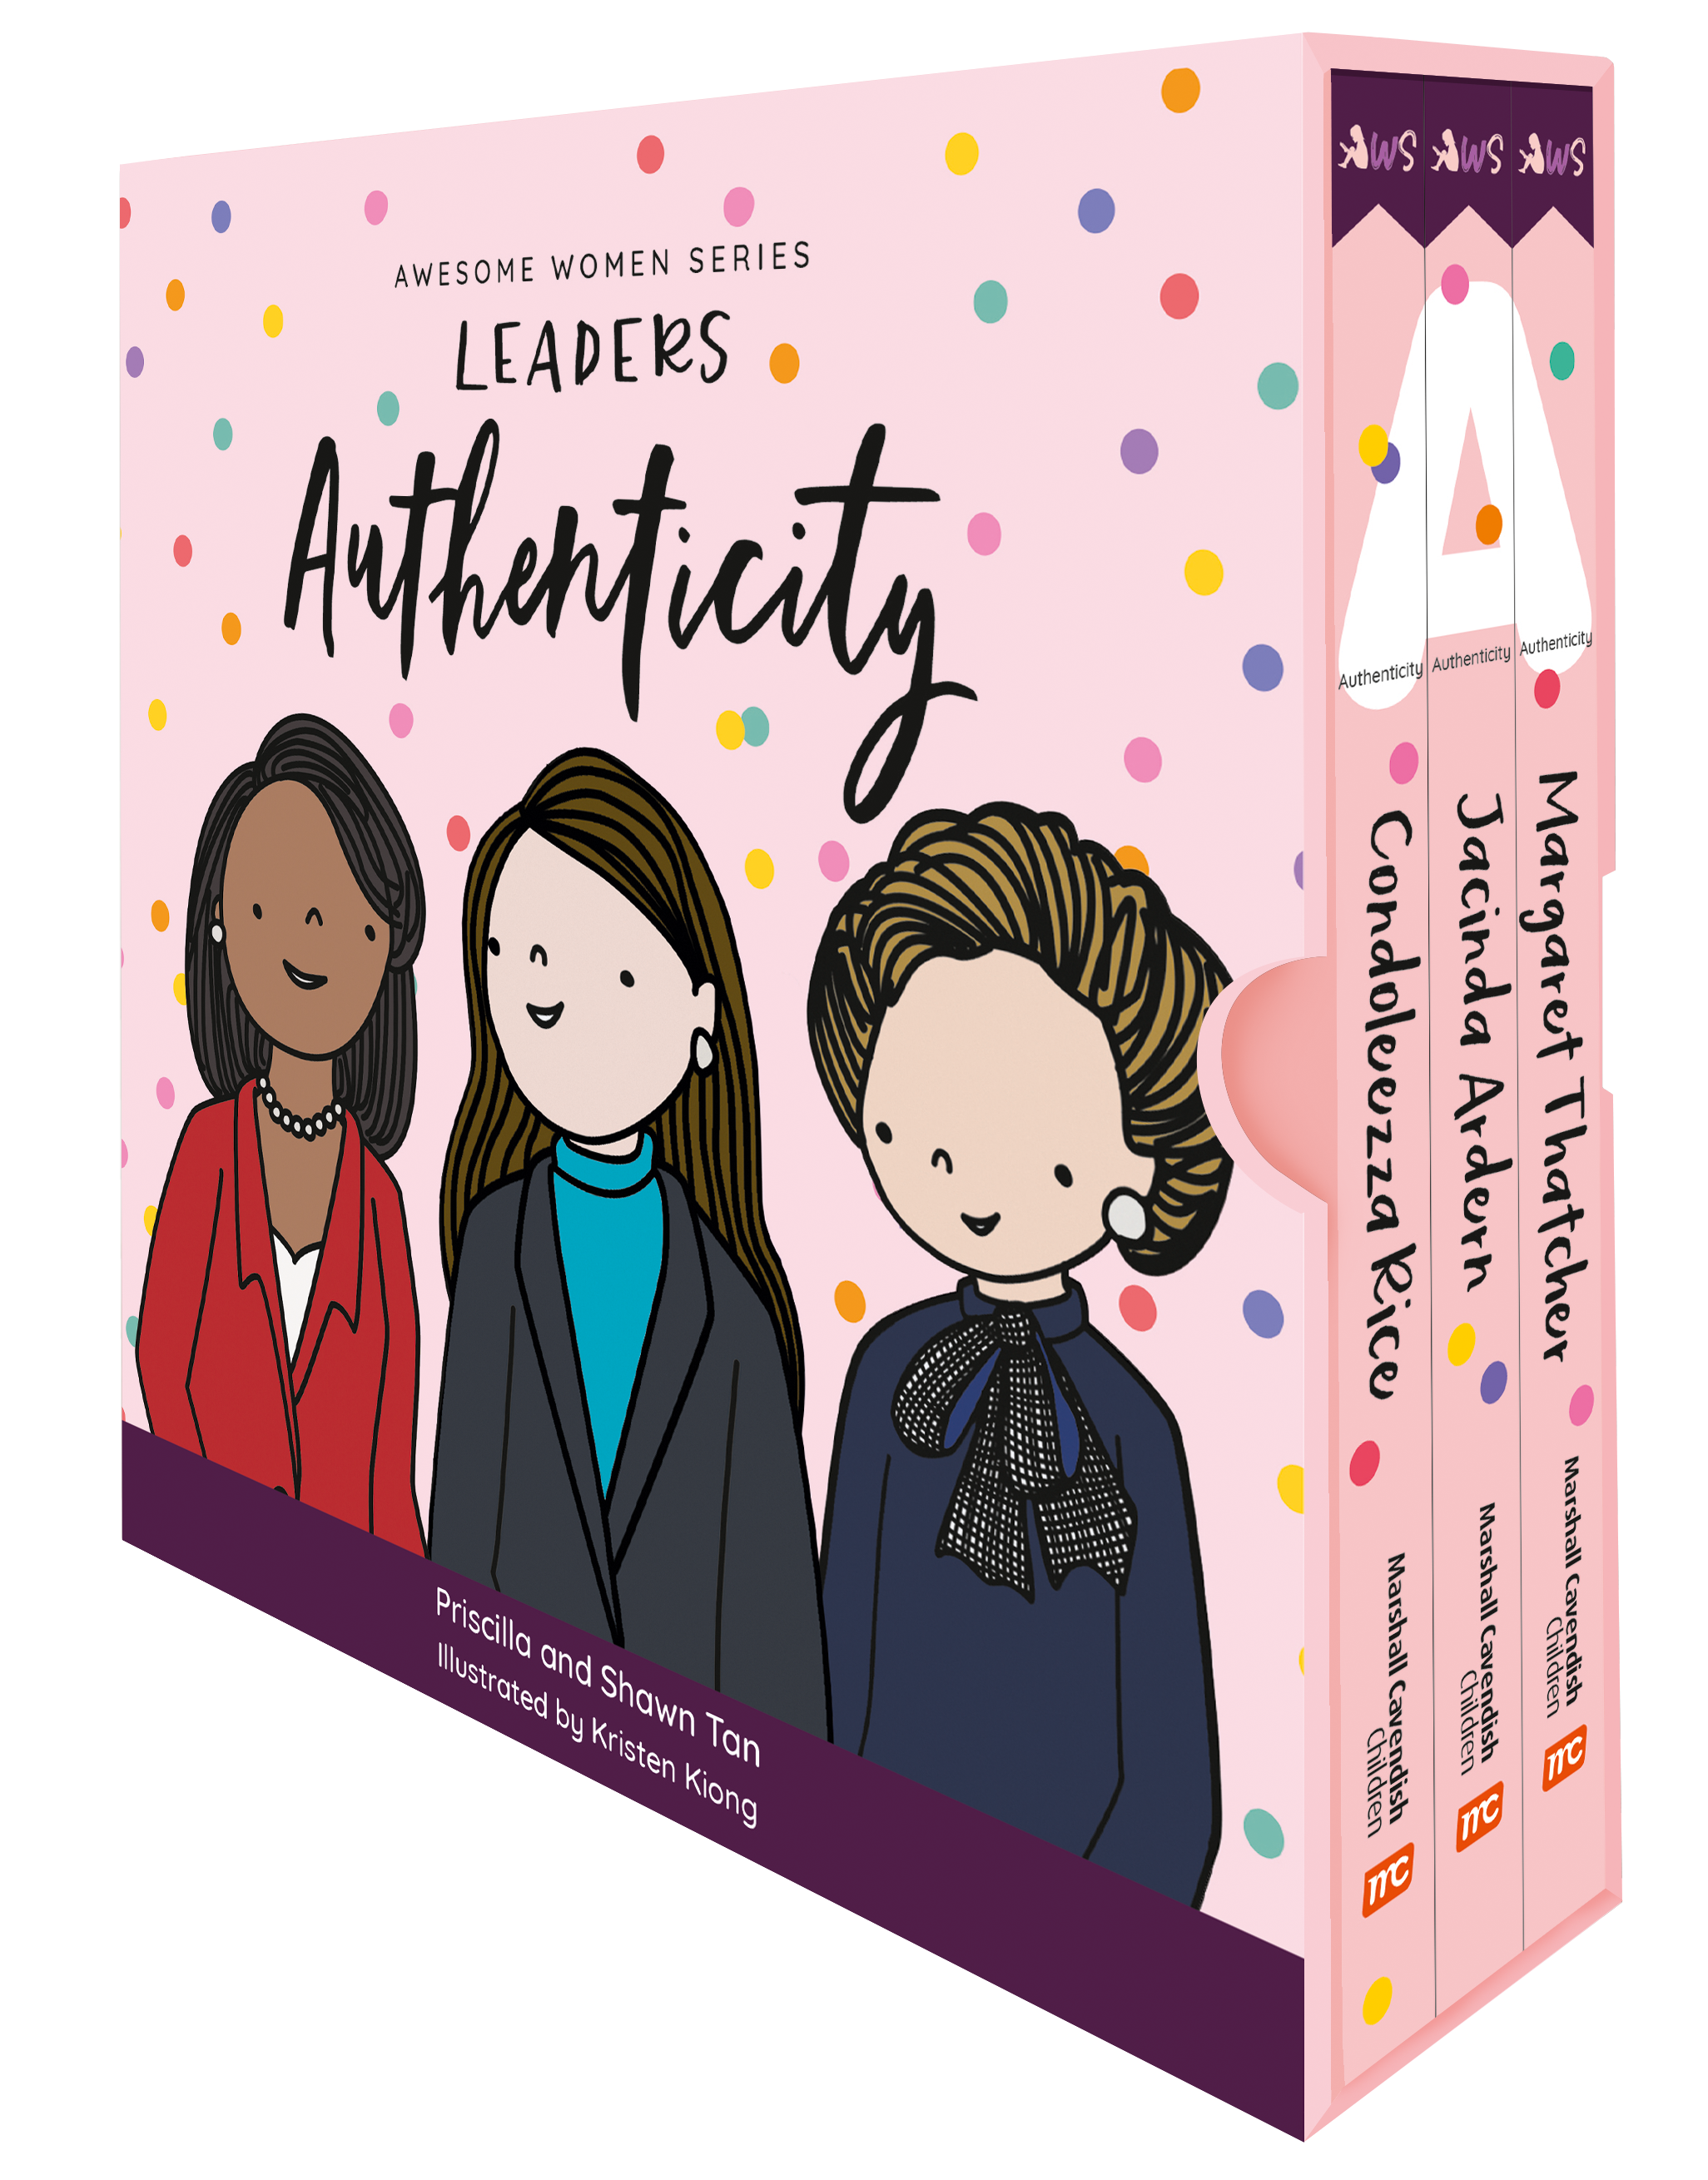 Awesome Women Series Leaders: Authenticity